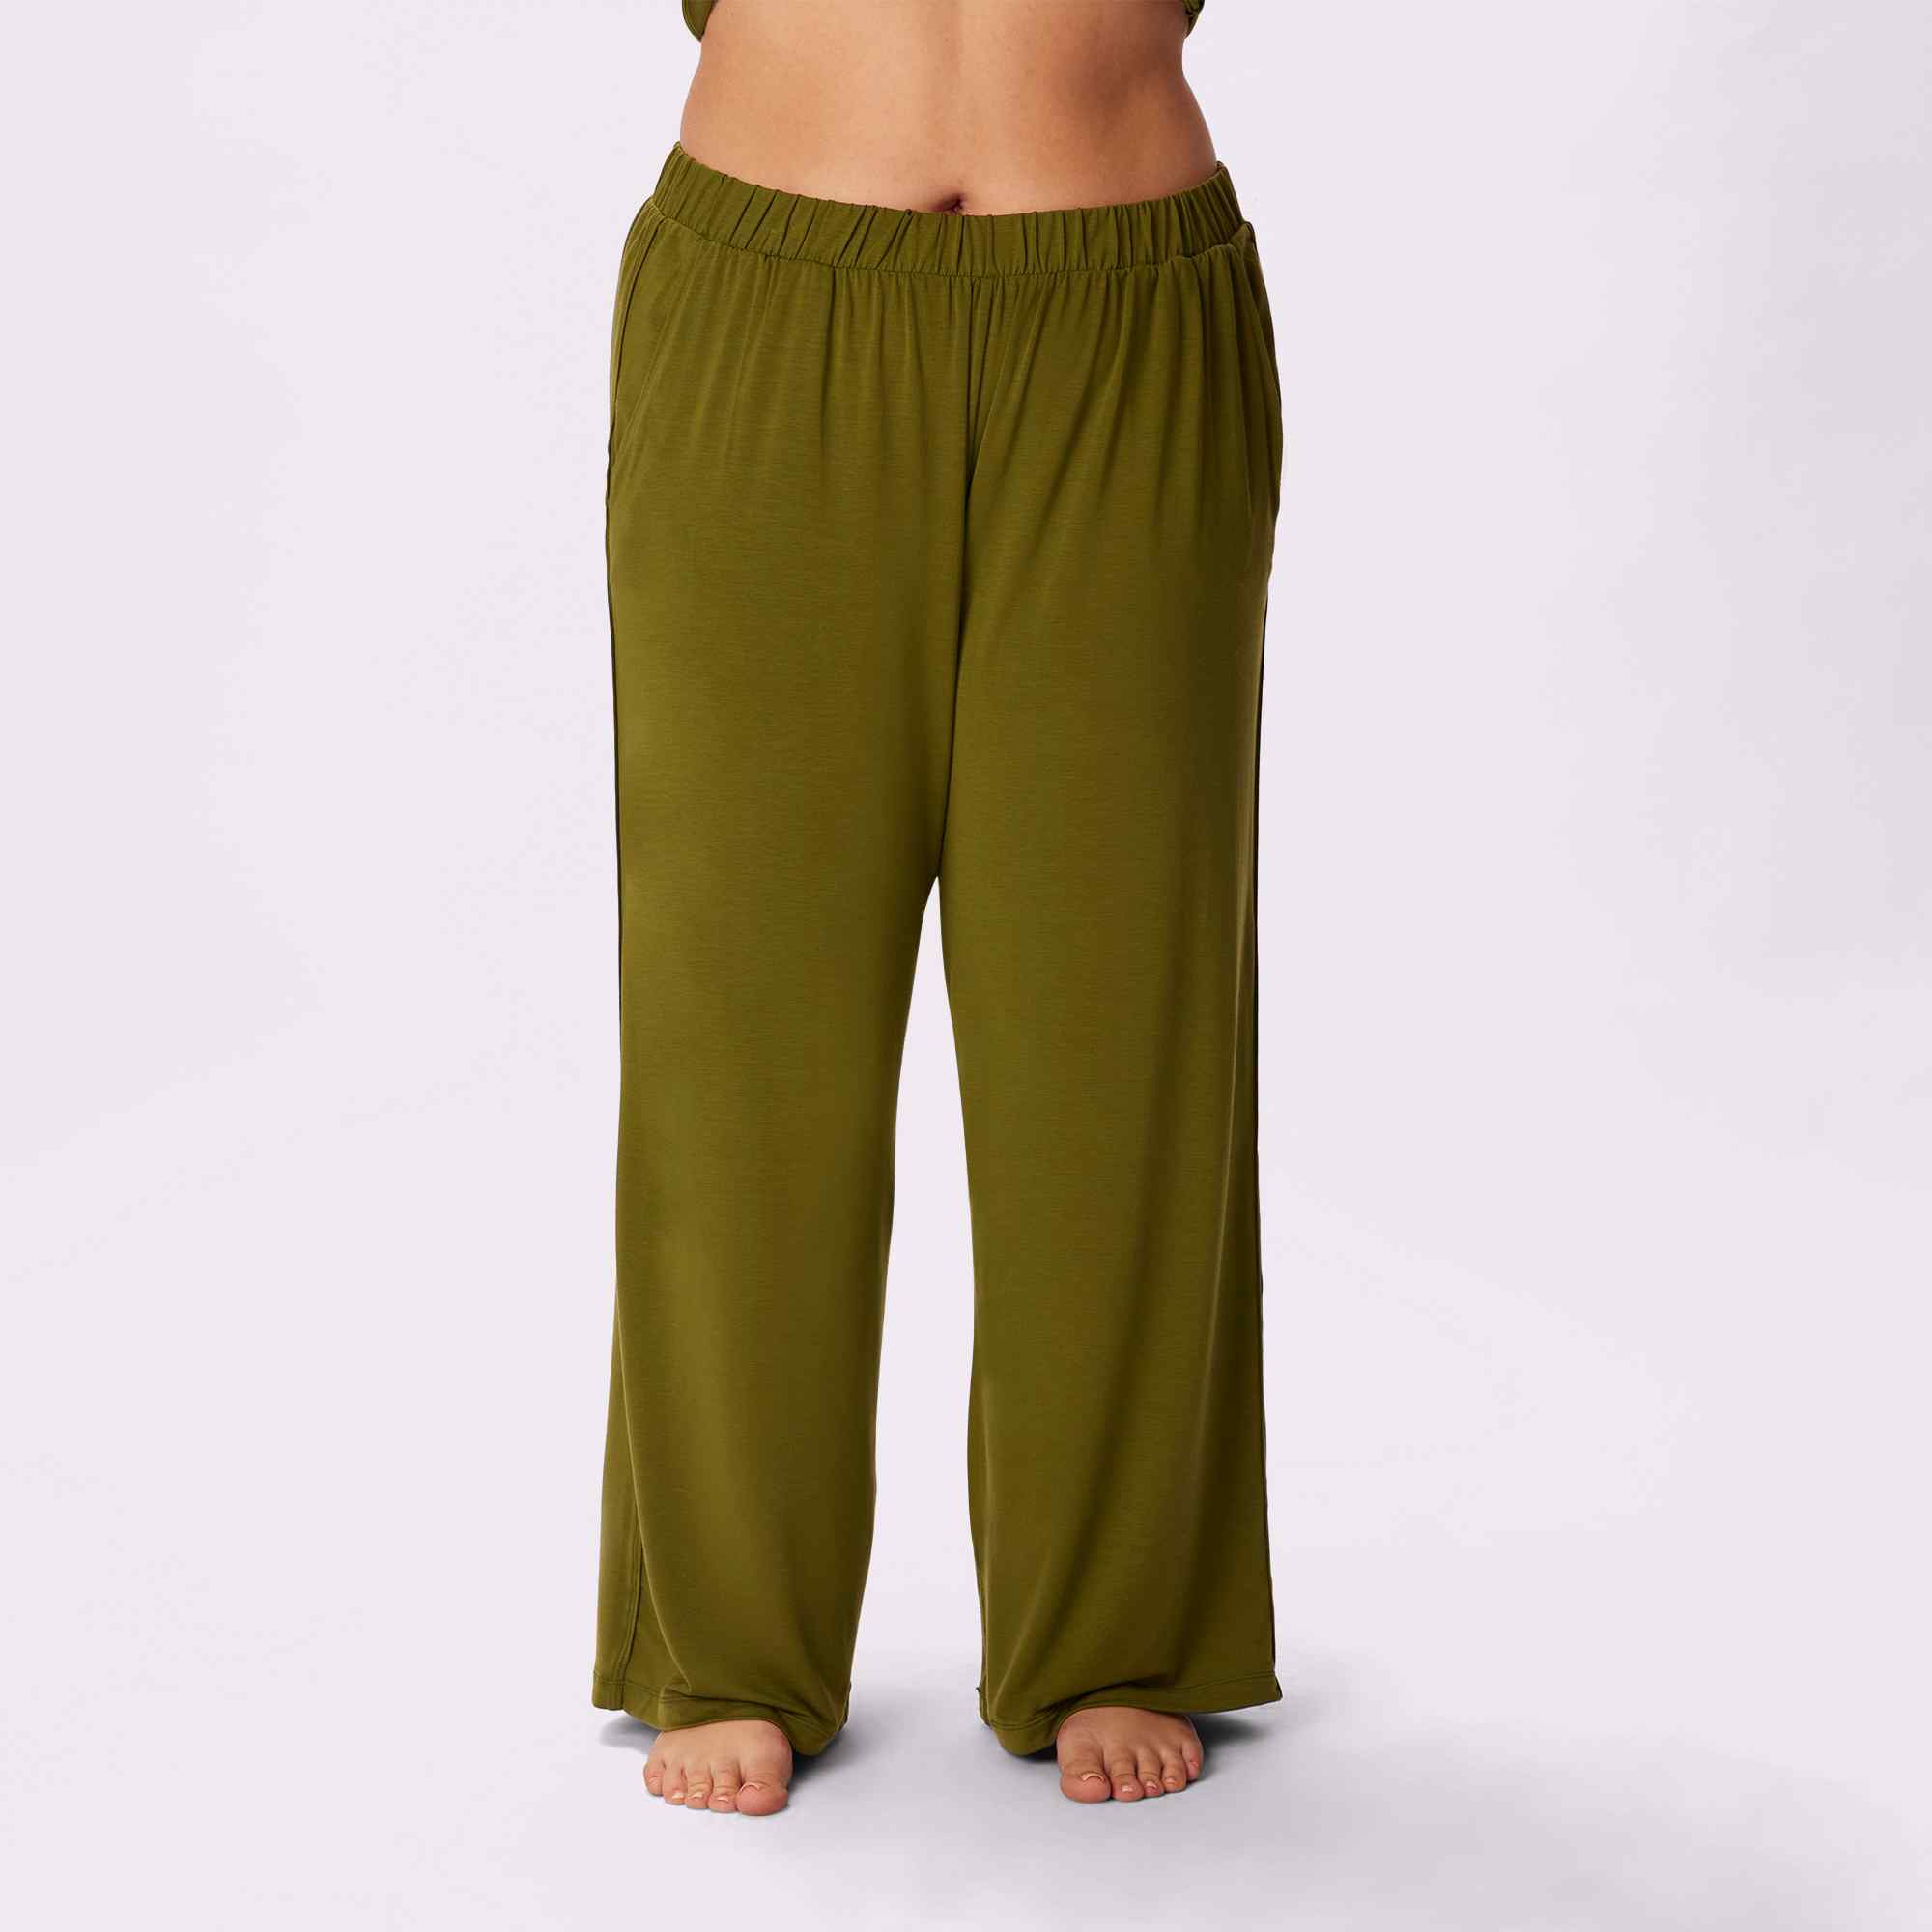 Crushed Velvet Tank Top And High Waist Palazzo Pants Set – Humble Bee  Boutique LLC.